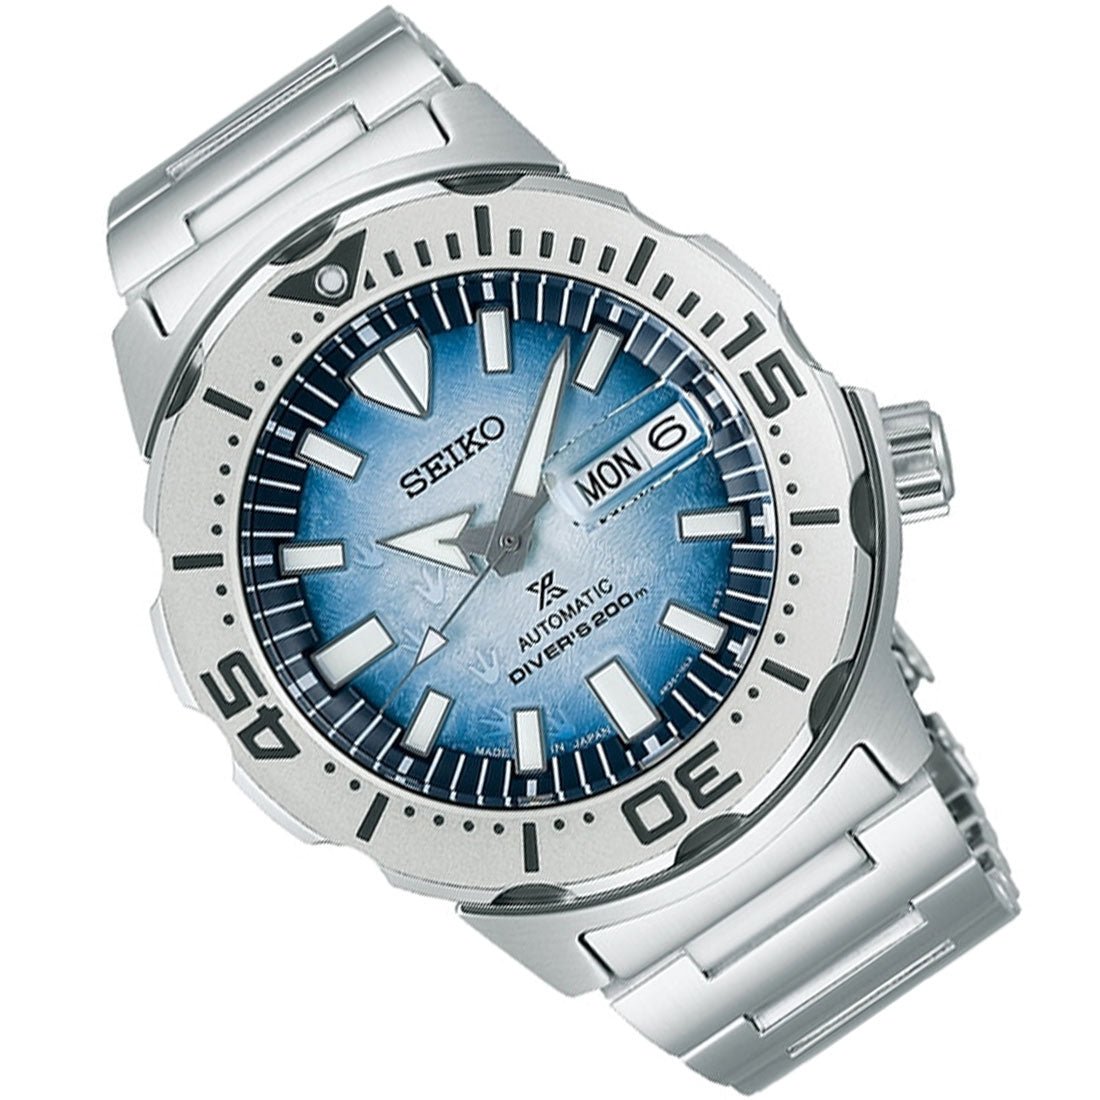 Seiko JDM Monster Prospex SBDY105 Save the Ocean Divers Watch -Seiko